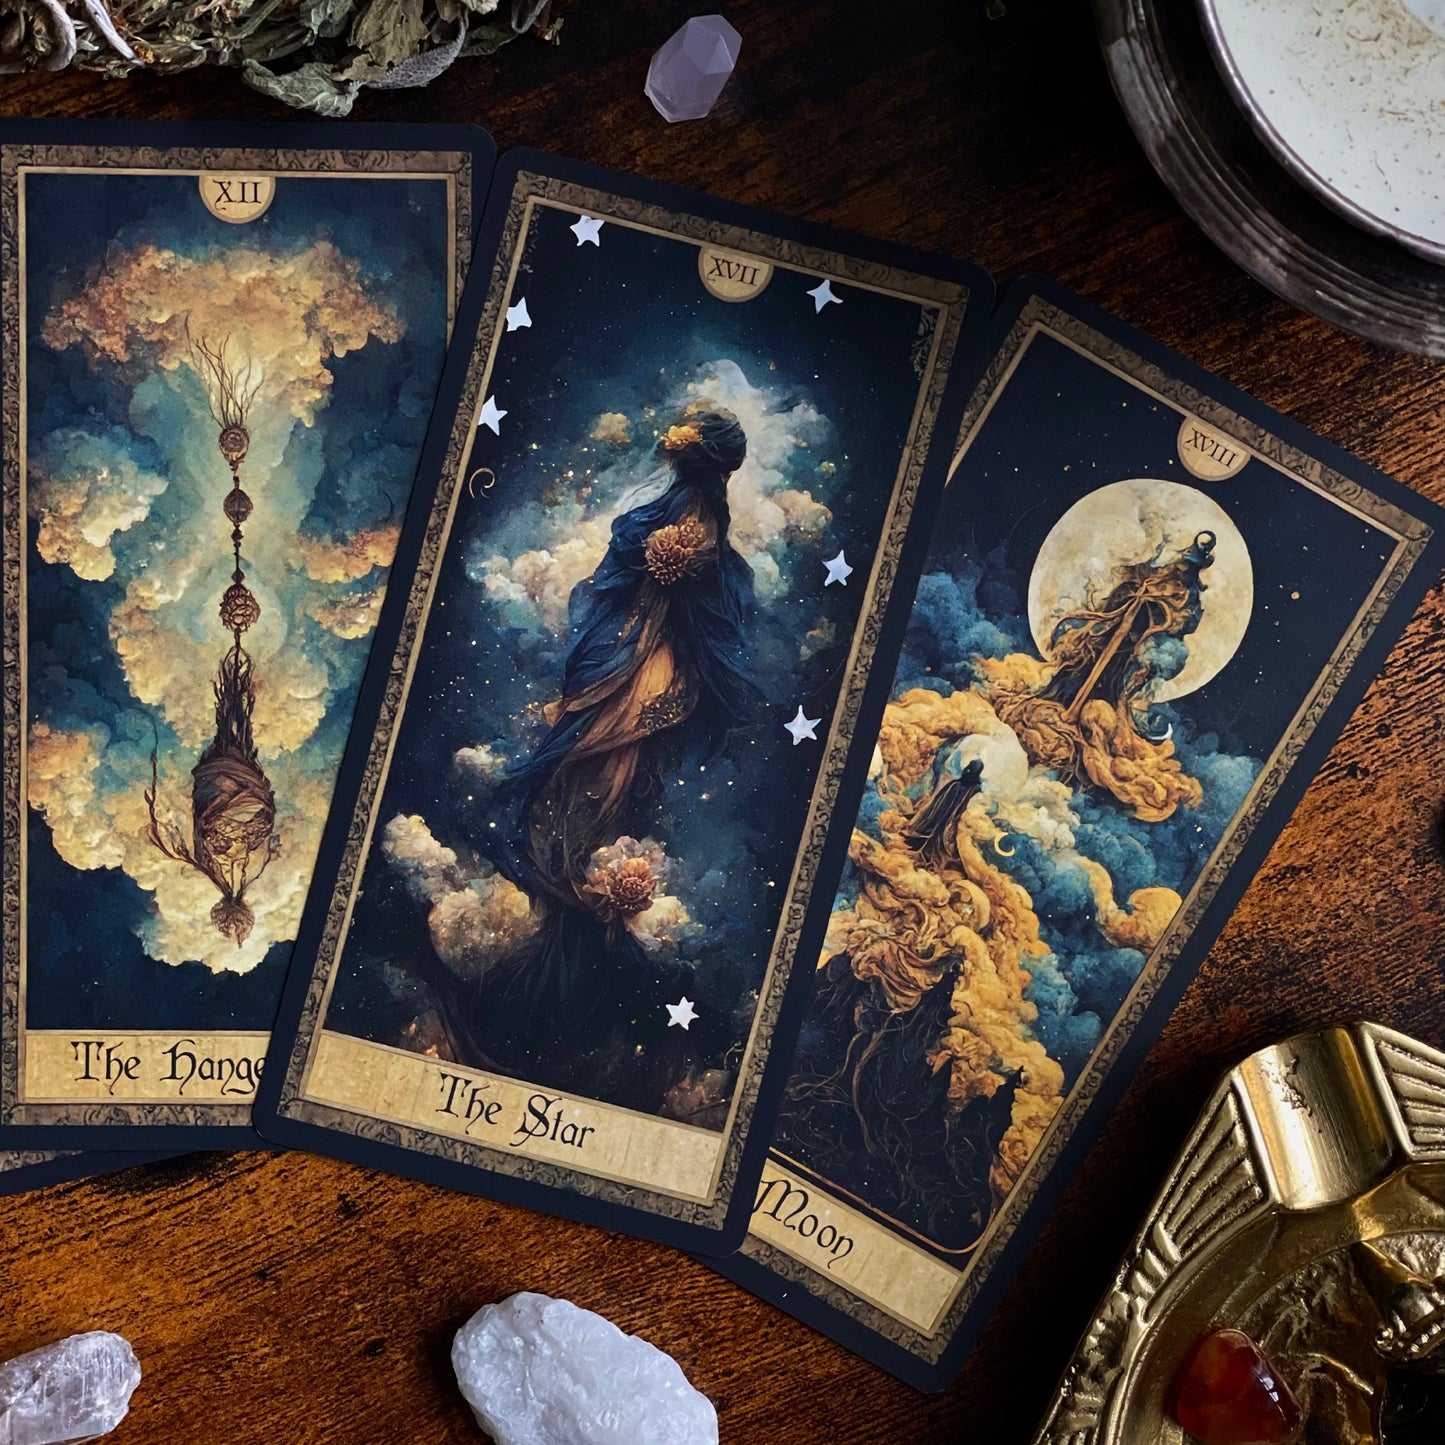 Complete spread of the Shadow Work Tarot Deck, showcasing 78 beautifully illustrated cards with a Victorian-era, antique look, ideal for deep spiritual insights and guidance.